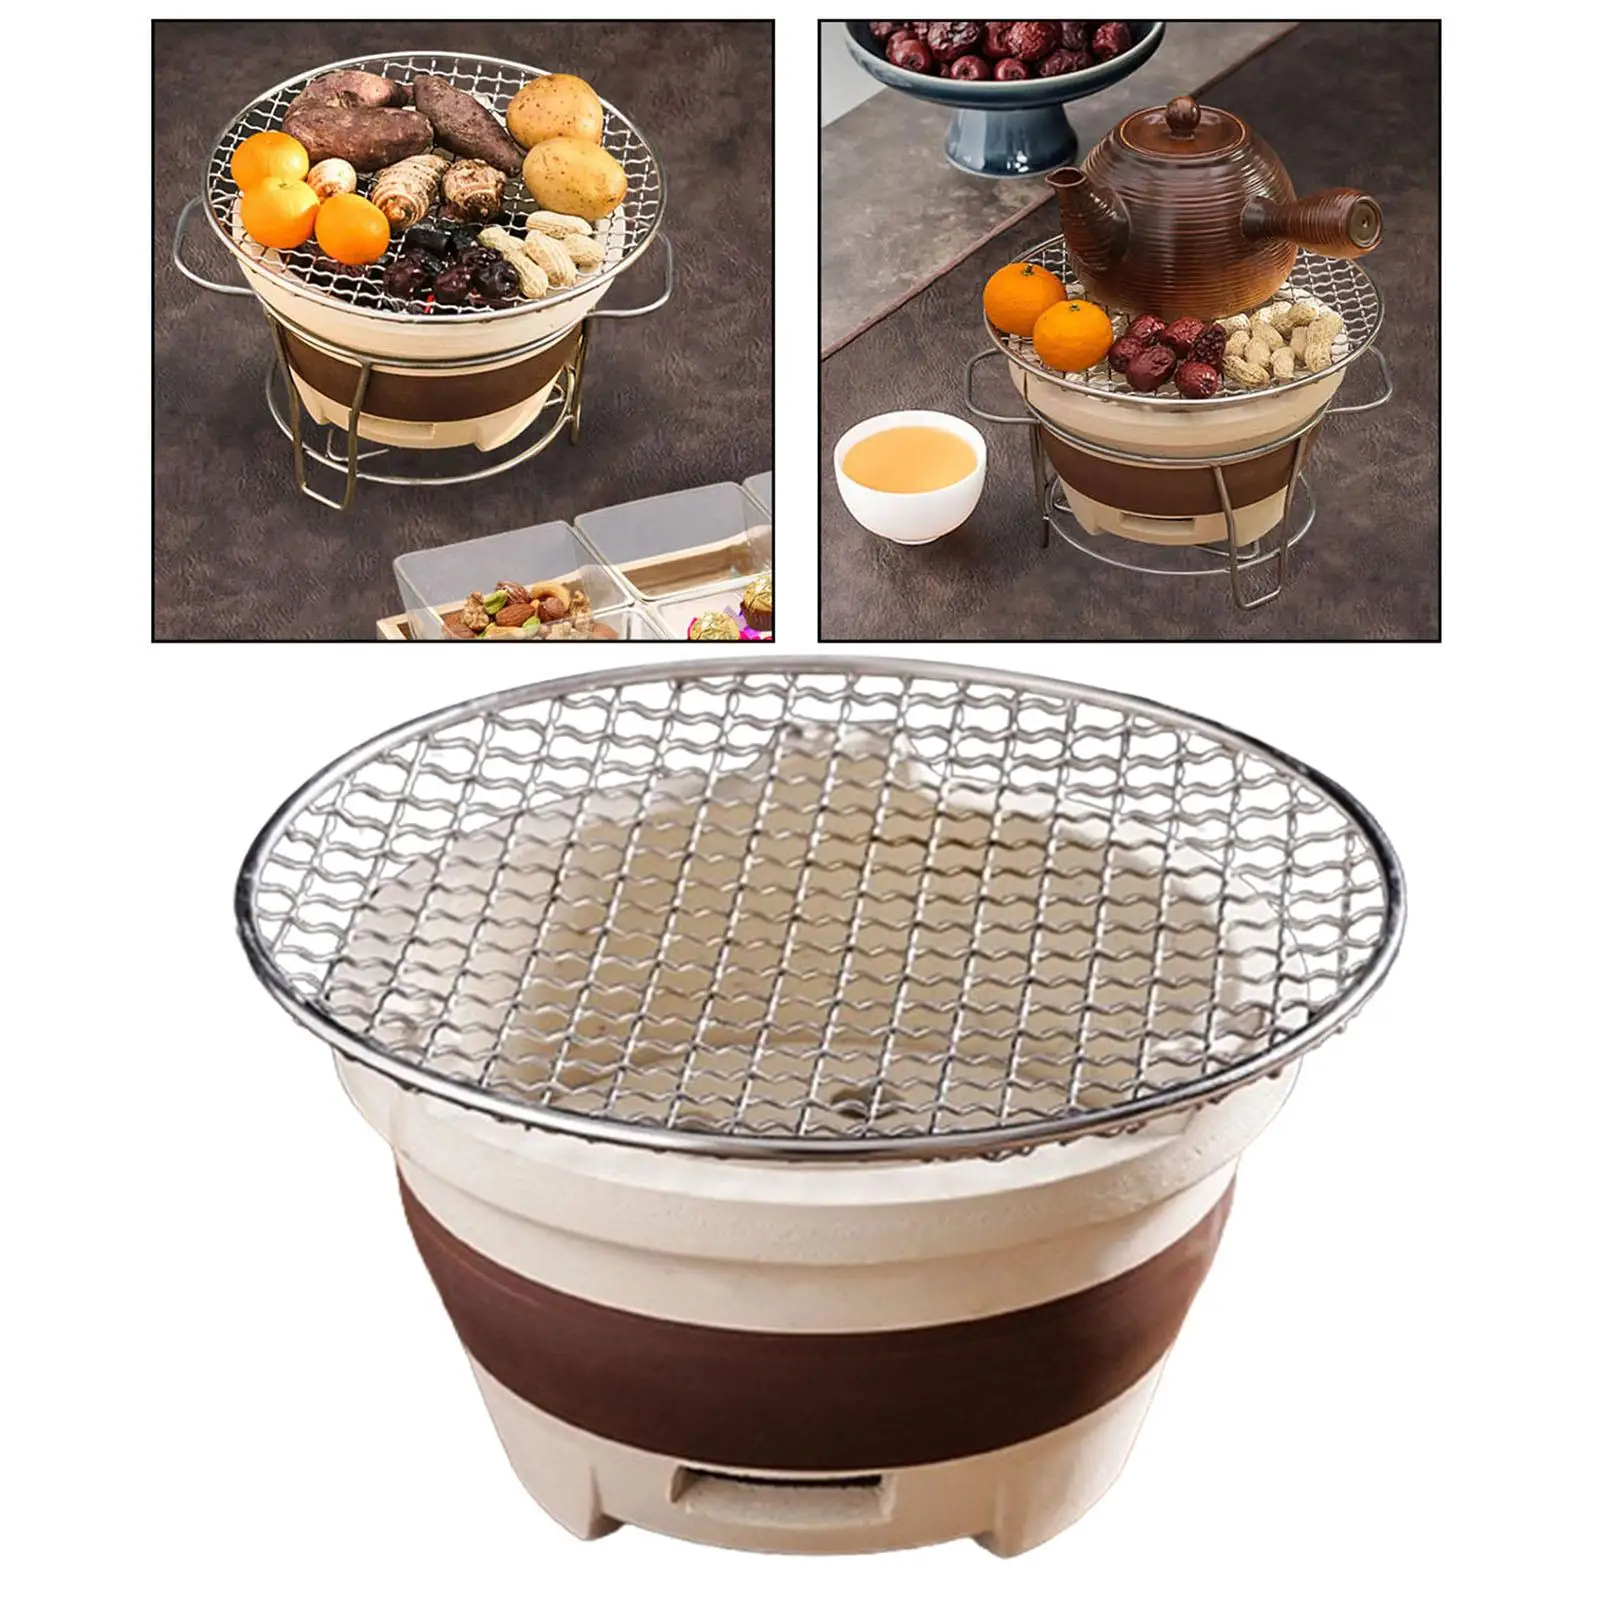 Pottery Clay Charcoal Stove Yakitori Grill for Garden Hiking Household